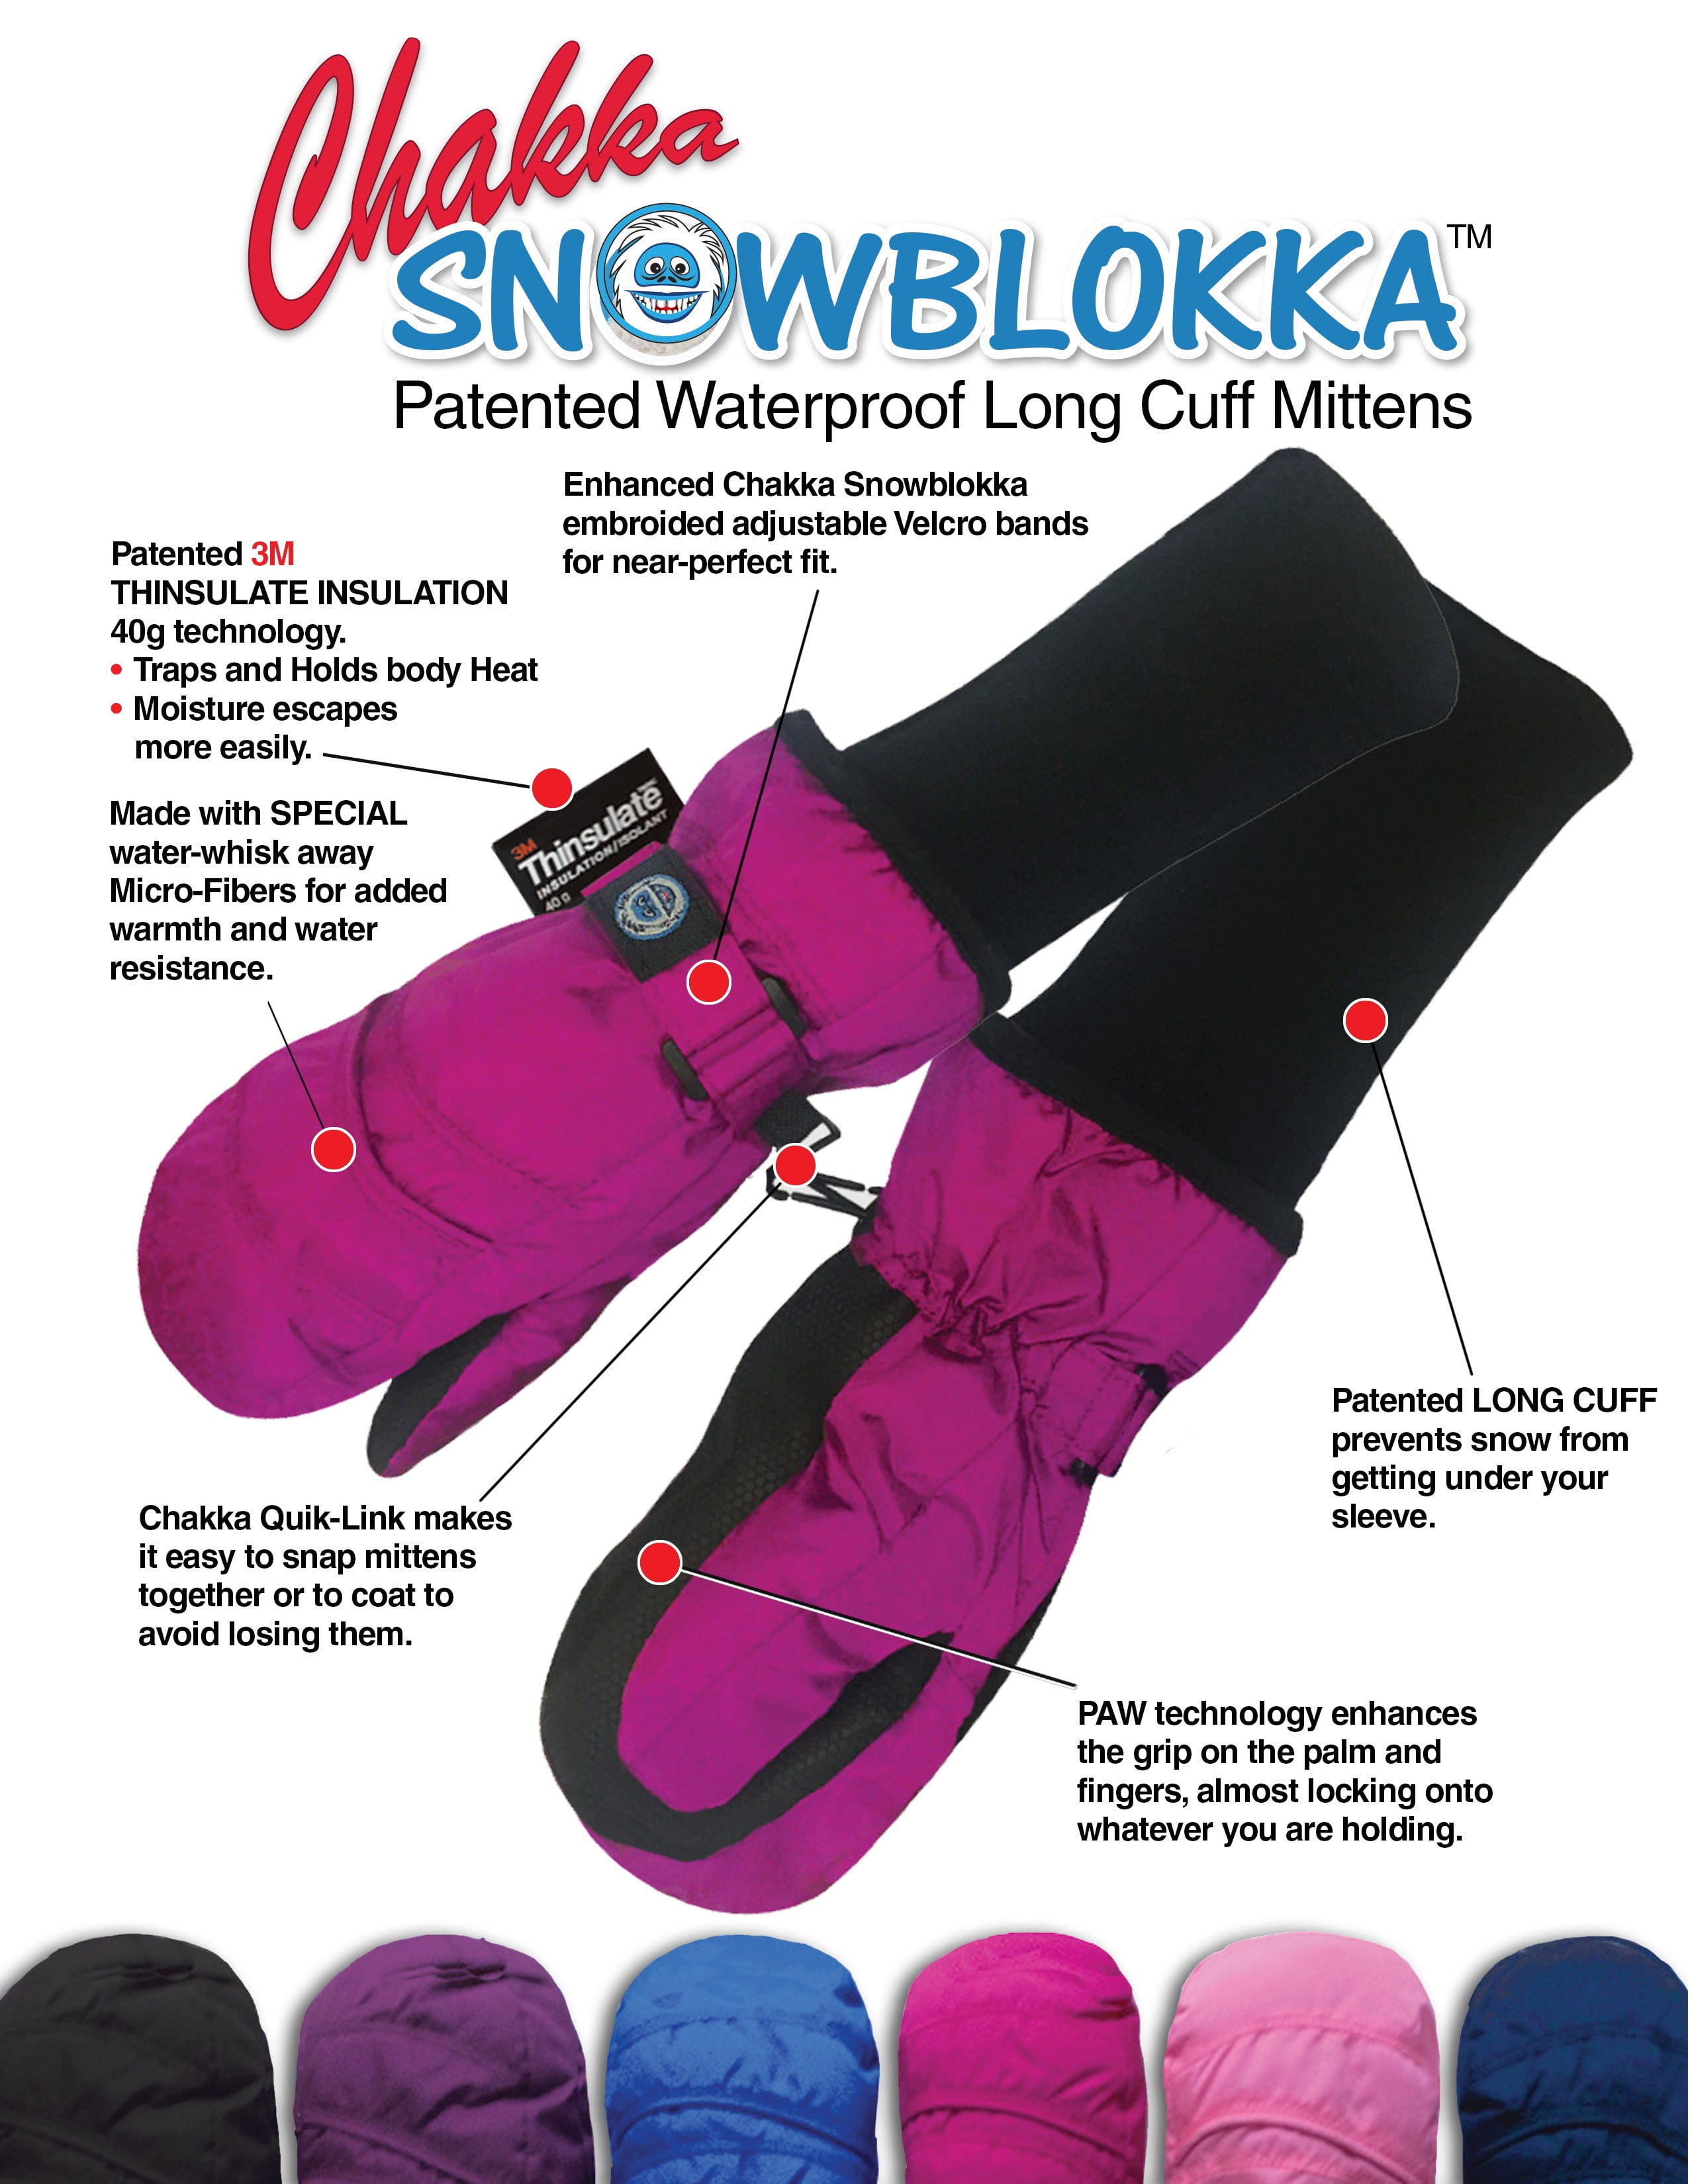 Chakka Snowblokka TM Kid's Snow Mittens Waterproof Nylon Great for Ski & Snowboard and Made with 3m Thinsulate and Extra Long Sleeve Foldable Cover Up 